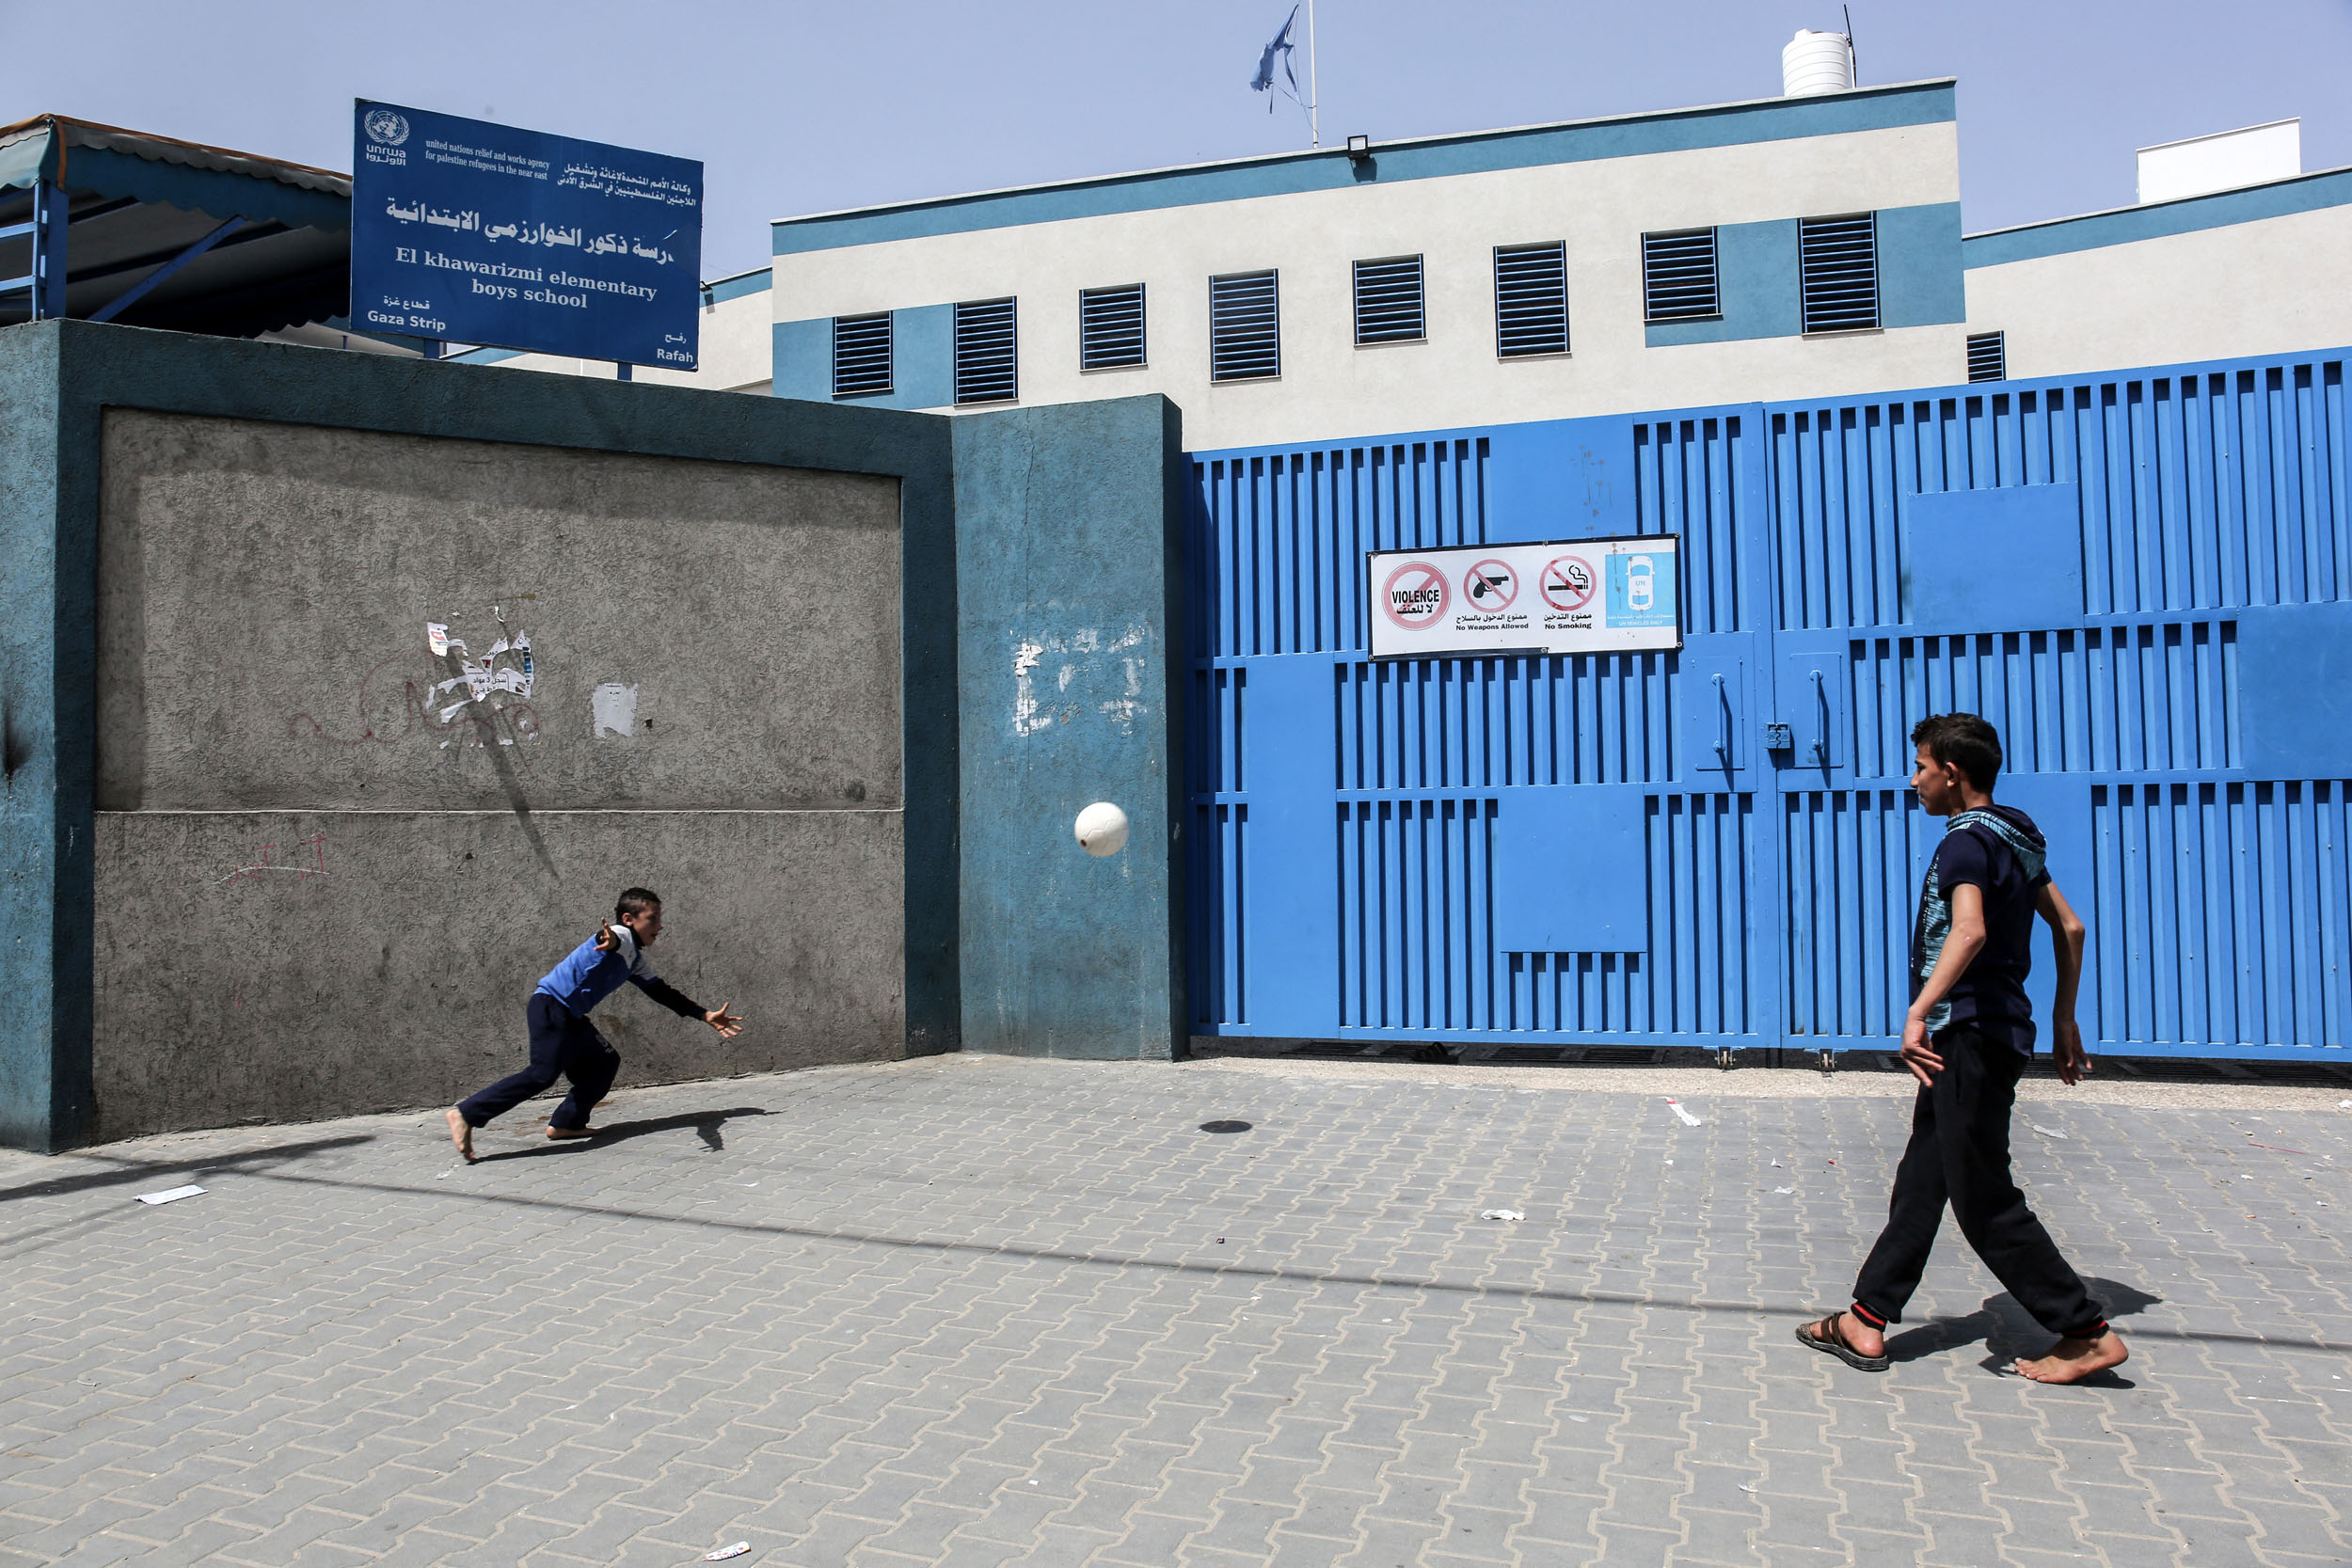 Children play with a football by the closed gate of a school run by the United Nations Relief and Works Agency for Palestinian Refugees (UNRWA) in the city of Rafah in the southern Gaza Strip on April 6, 2021, amidst a lockdown due to the COVID-19 coronavirus pandemic. (Photo by SAID KHATIB / AFP)